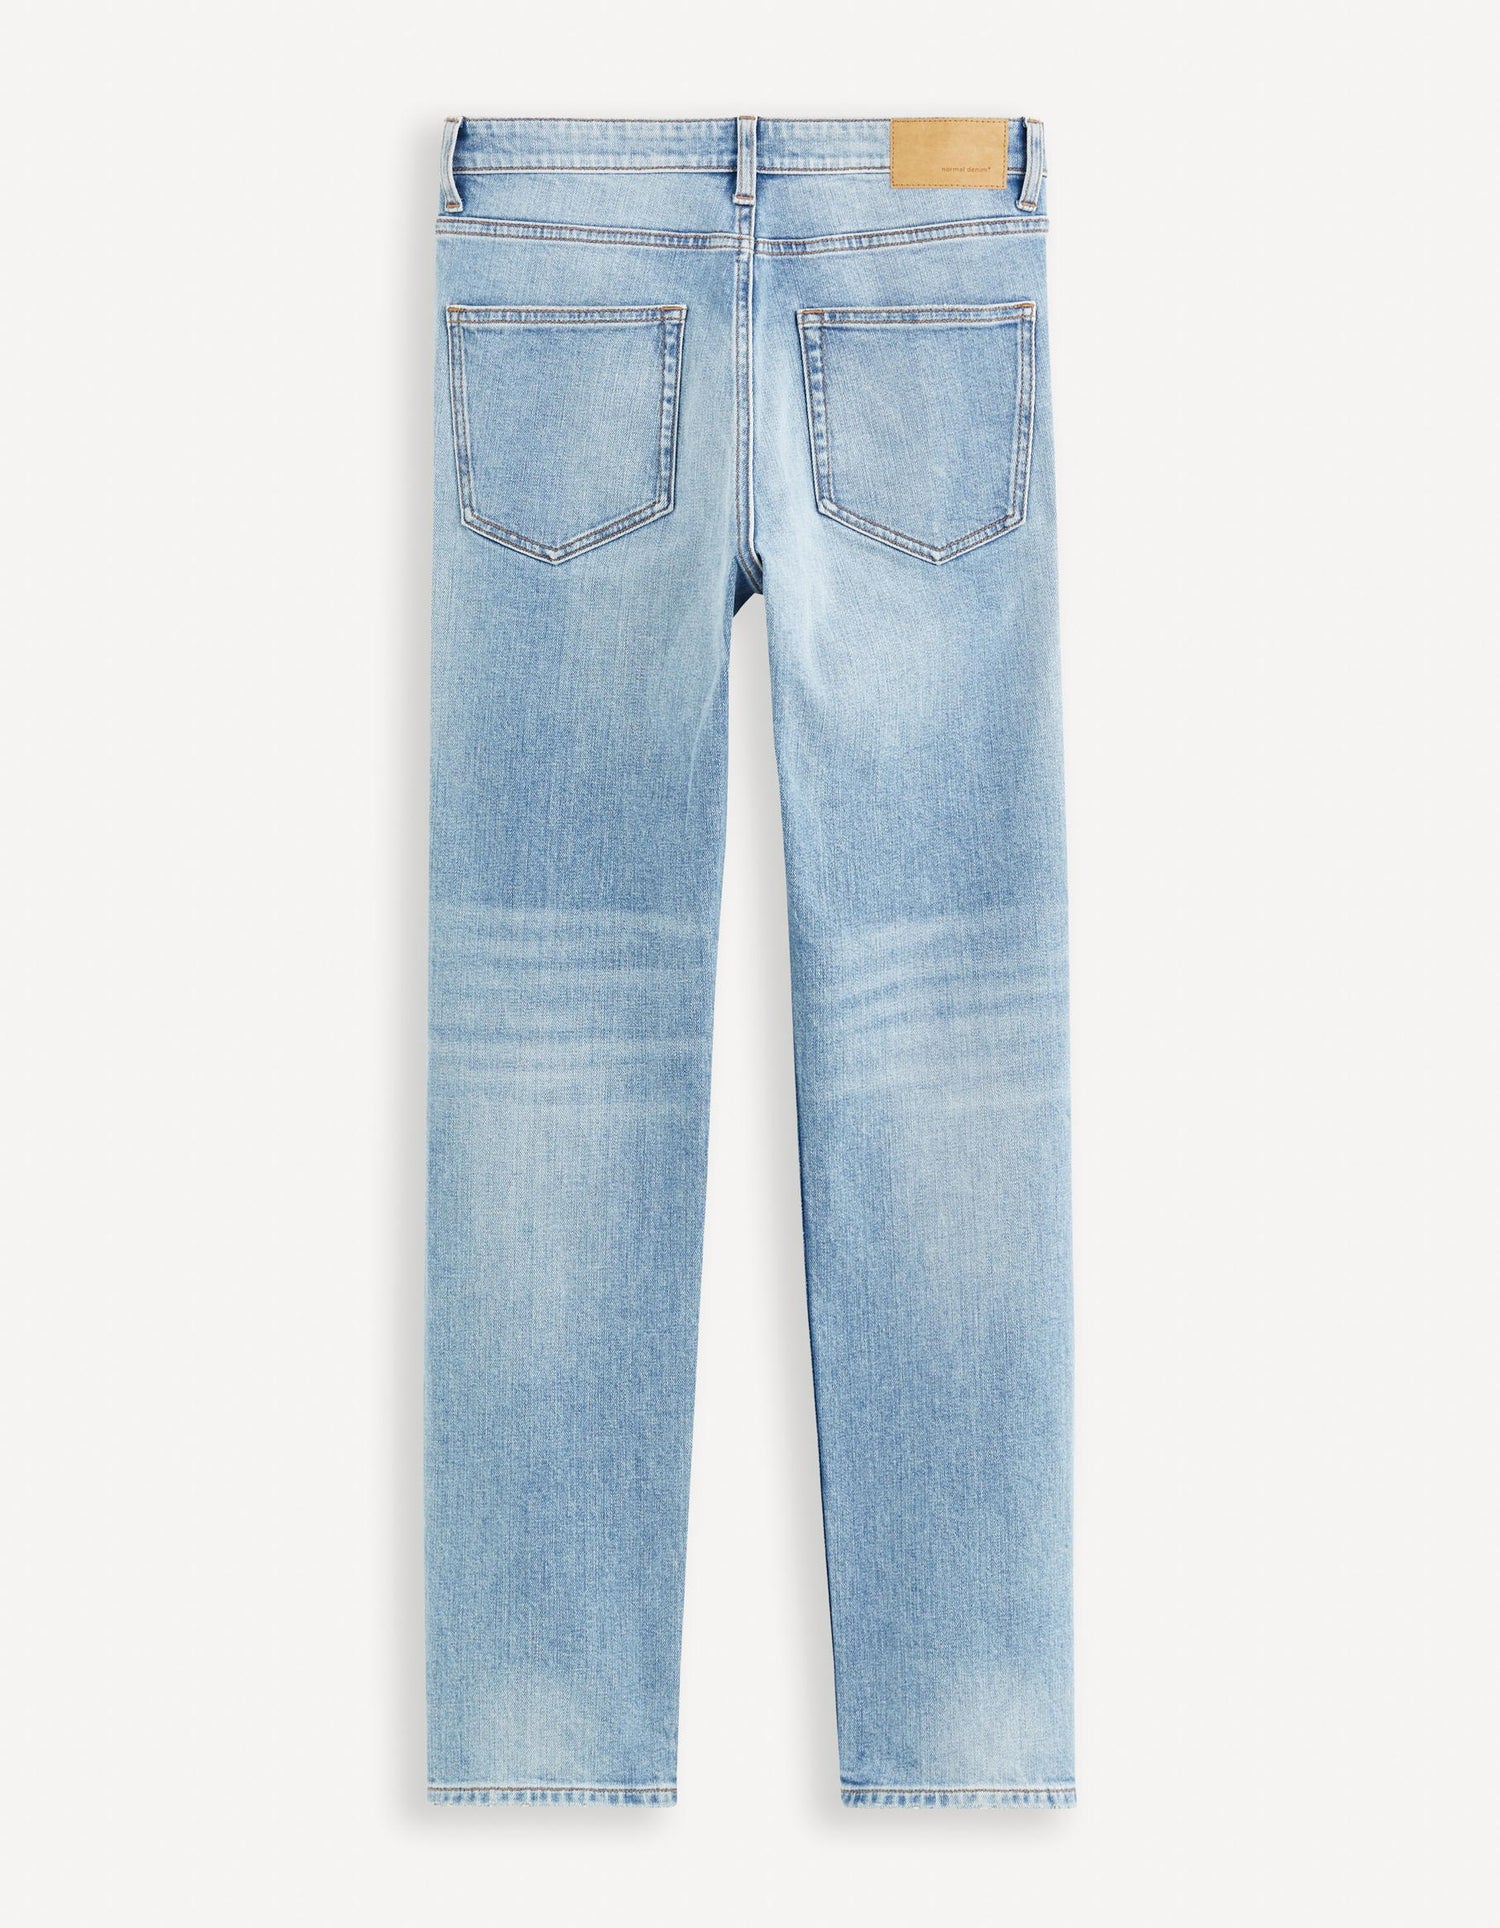 C15 Straight Jeans 3 Lengths - Bleached_STRAIGHT3L_BLEACHED_06